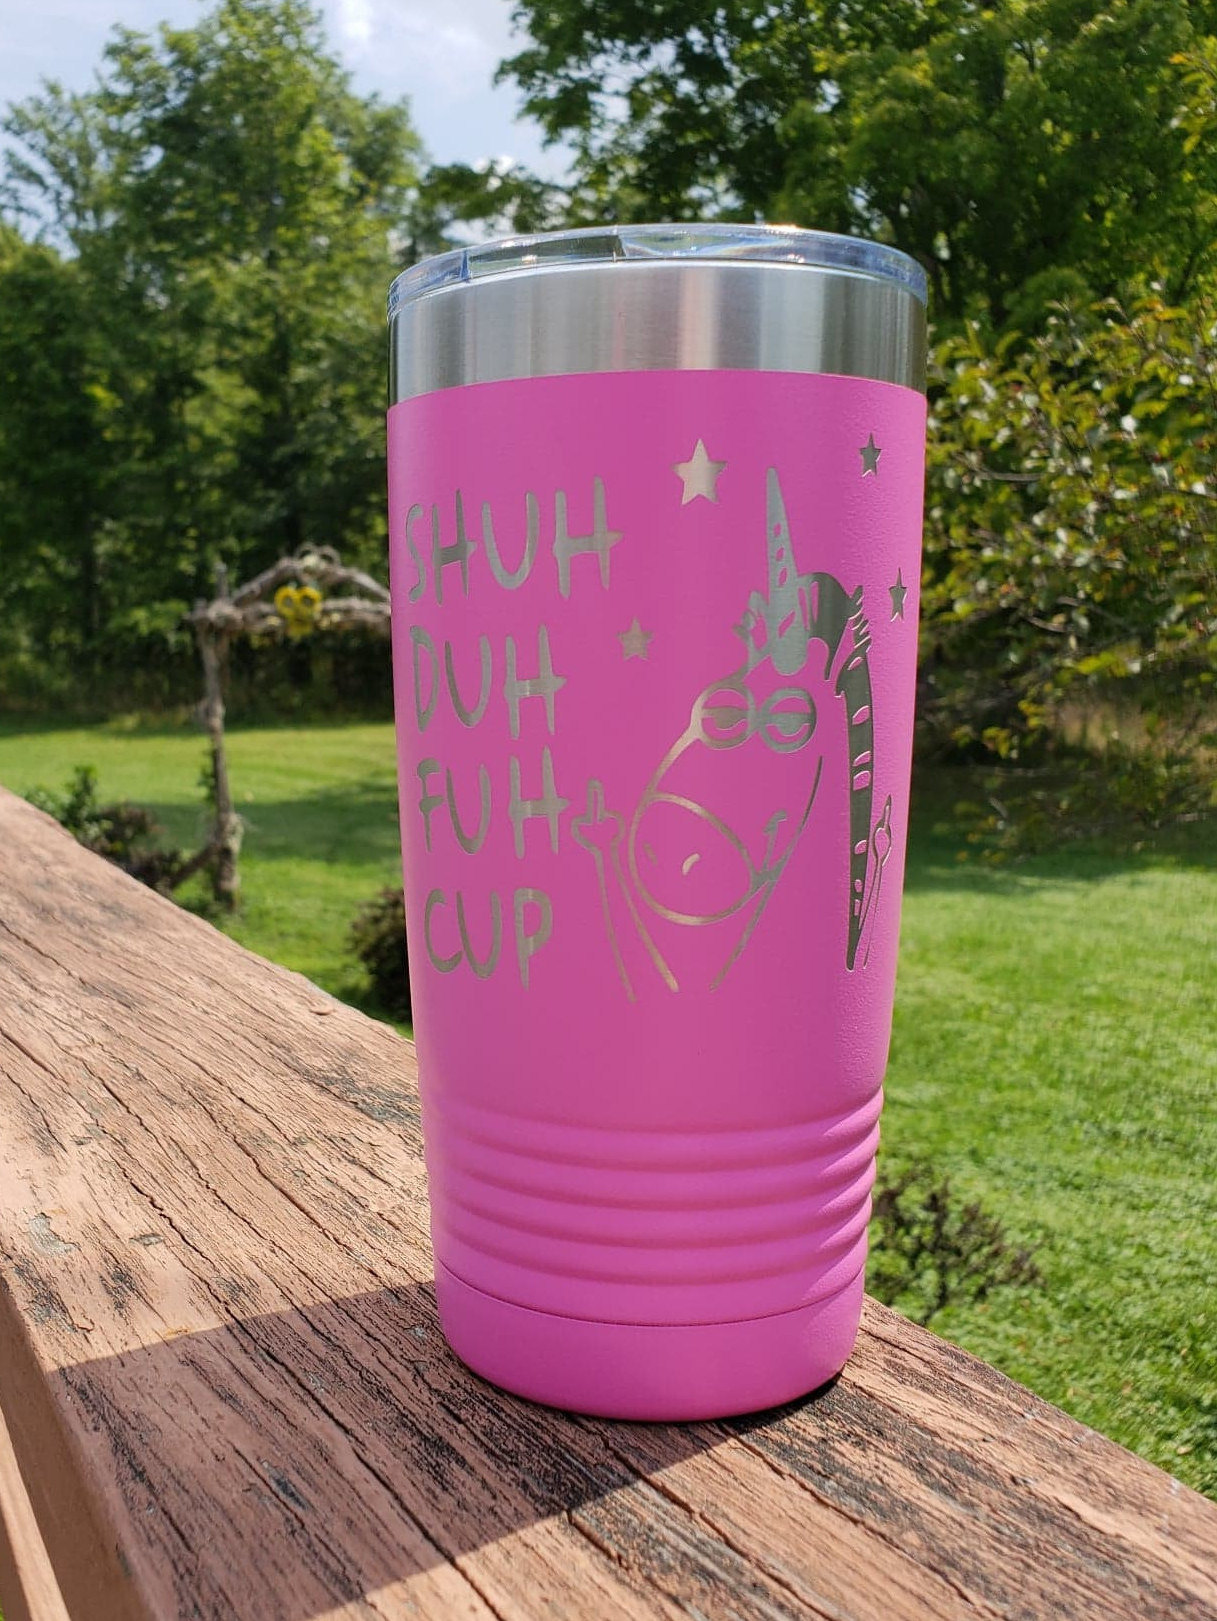 https://3cetching.com/wp-content/uploads/2020/09/shuh-duh-fuh-cup-engraved-stainless-steel-tumbler-yeti-style-cup-cute-unicorn-5f5fb427.jpg